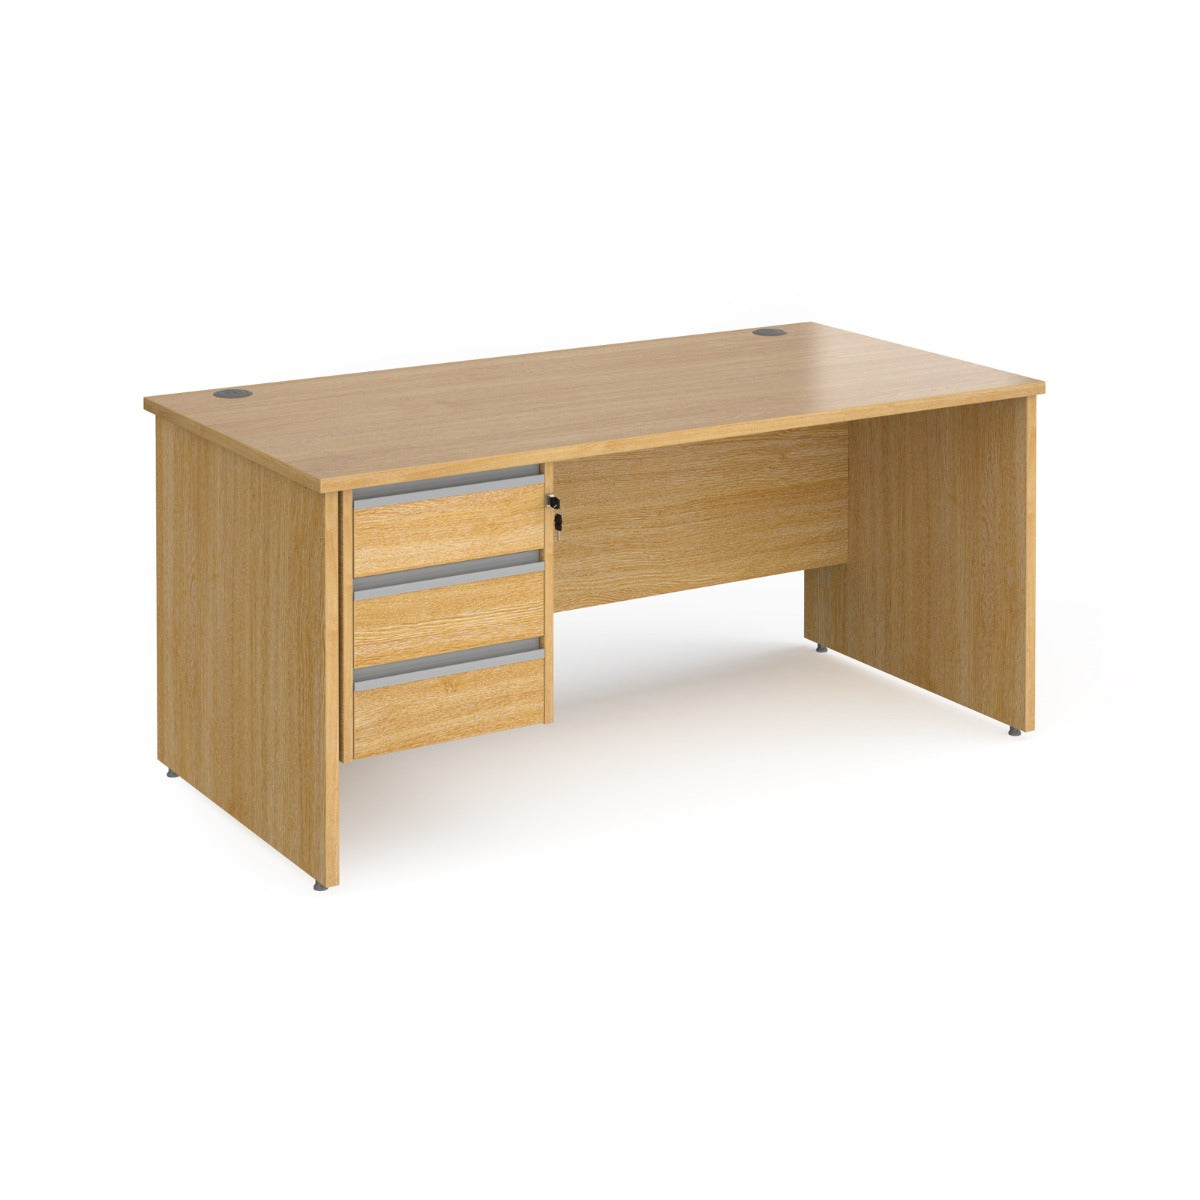 Contract Panel Leg Straight Office Desk with Three Drawer Storage